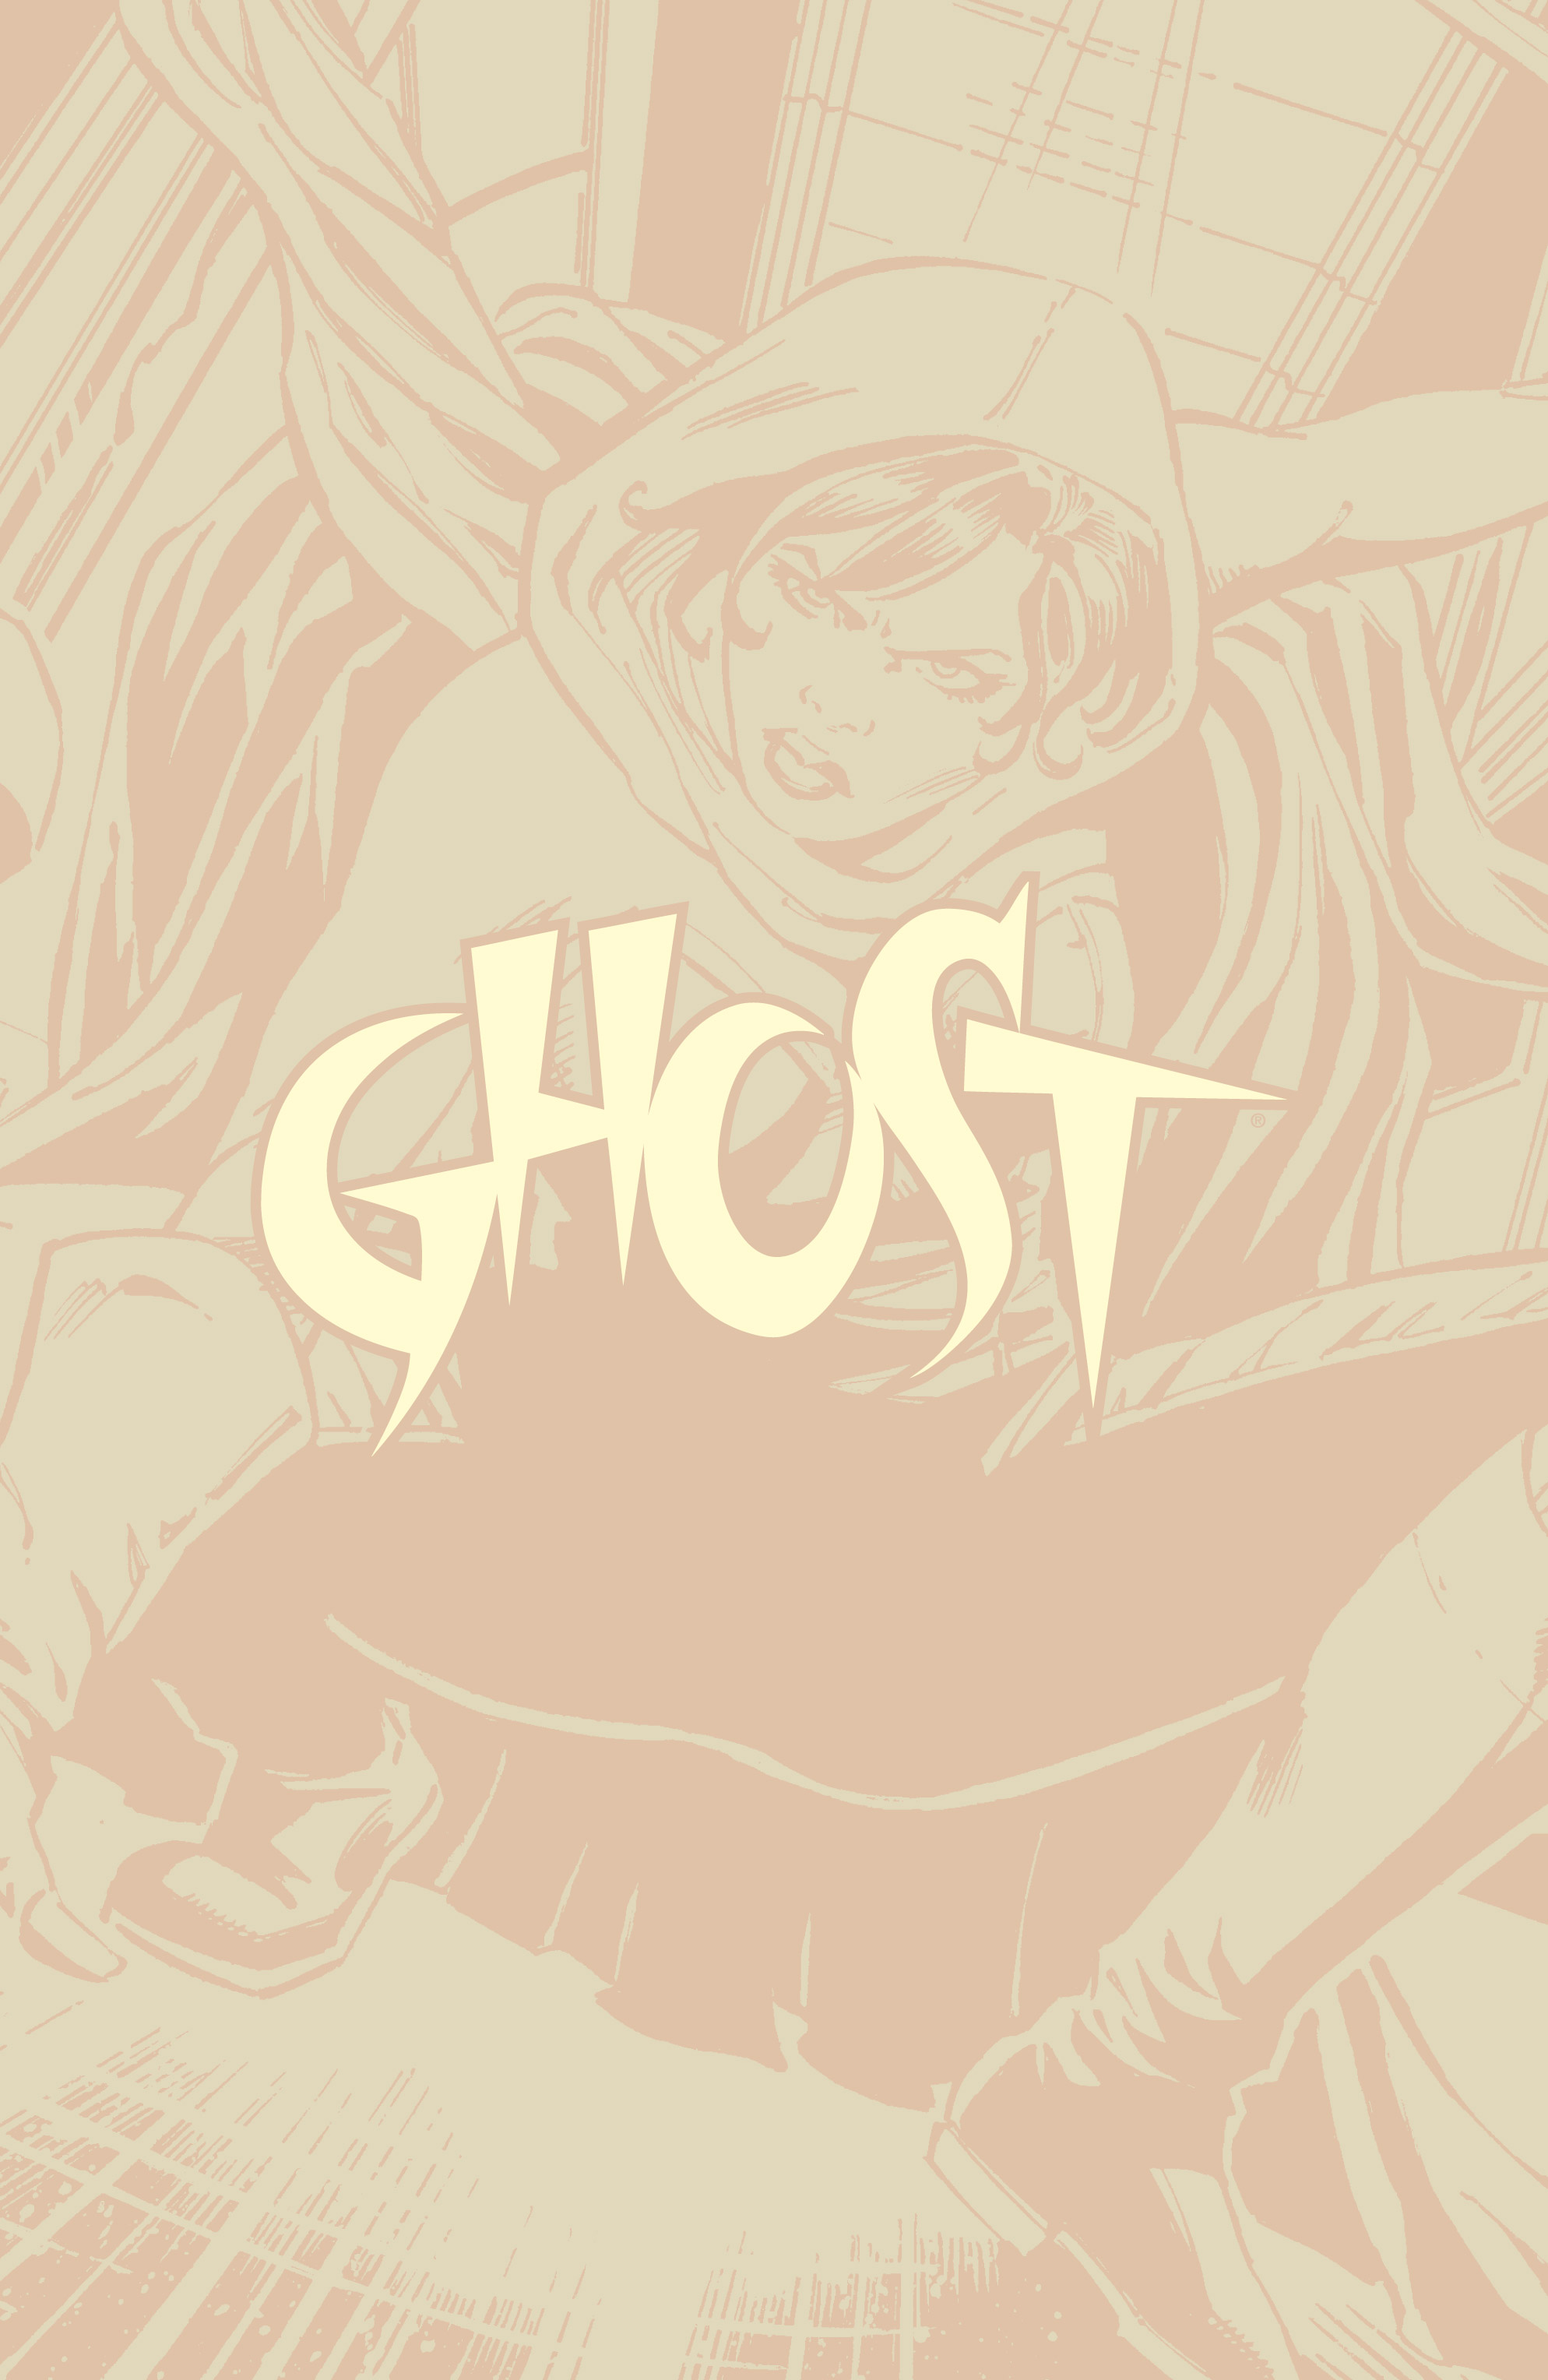 Read online Ghost (2013) comic -  Issue # TPB 2 - 31